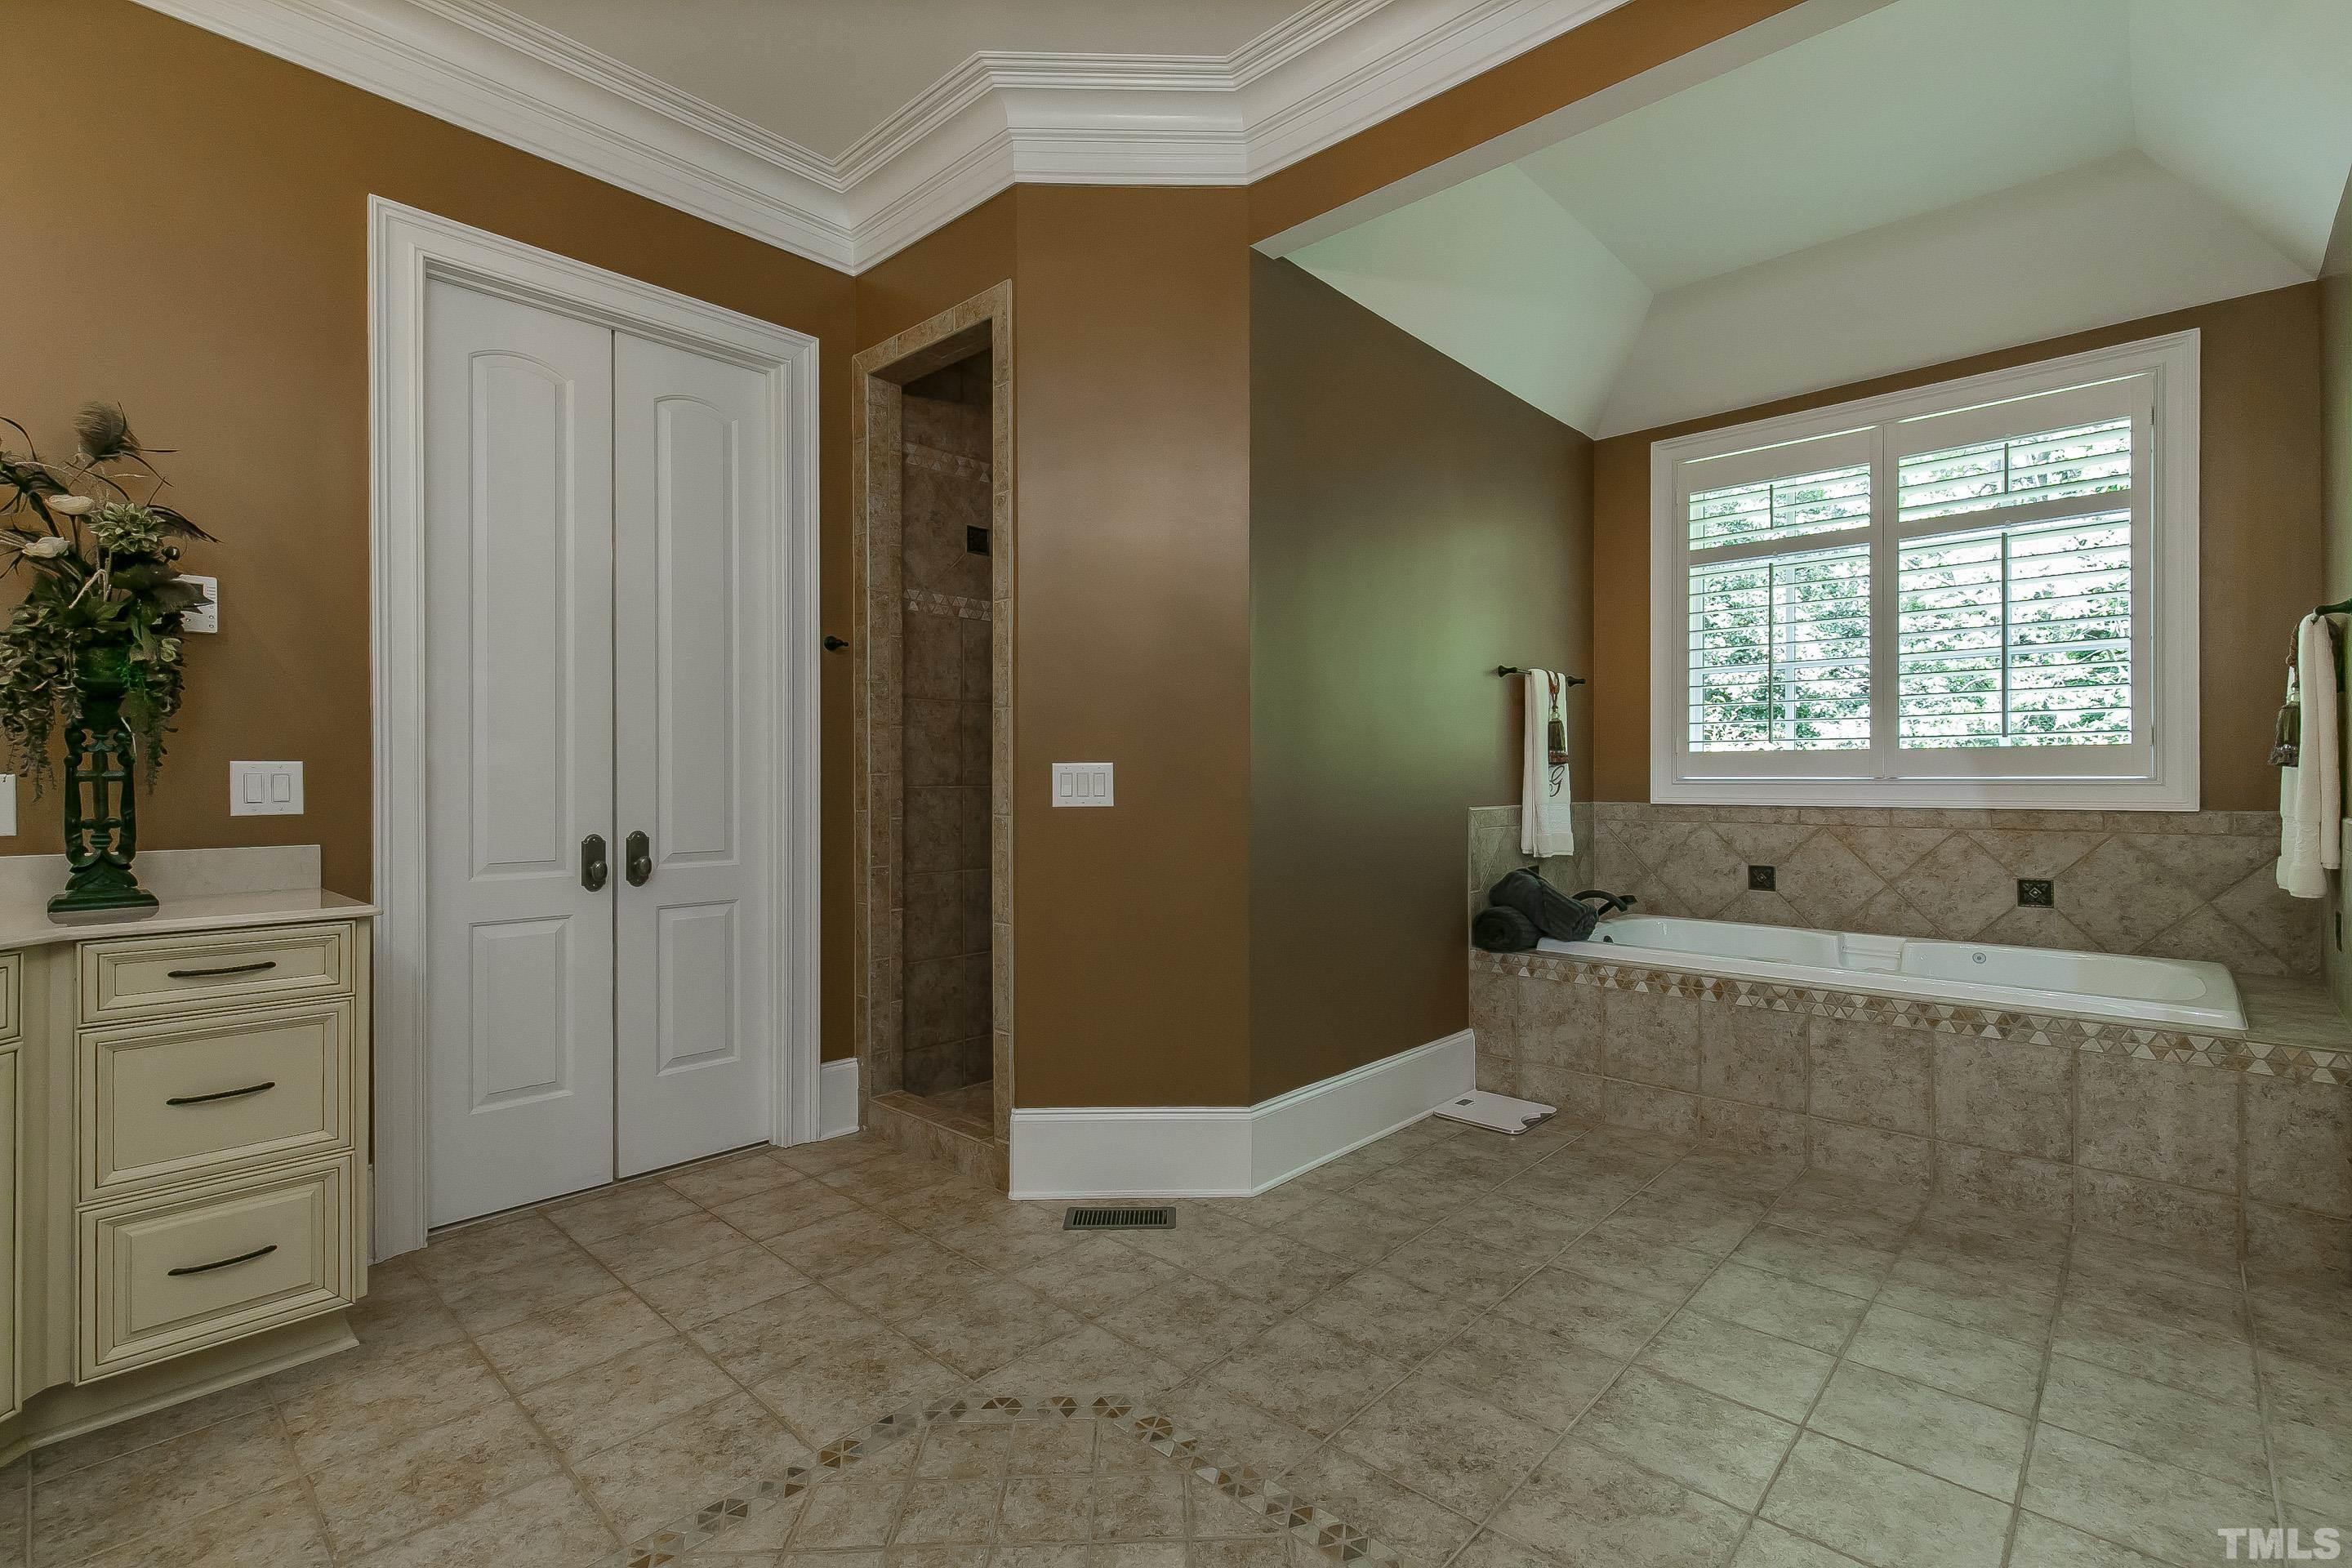 DEEP jet tub, trey ceiling, shower and access to walk-in closet